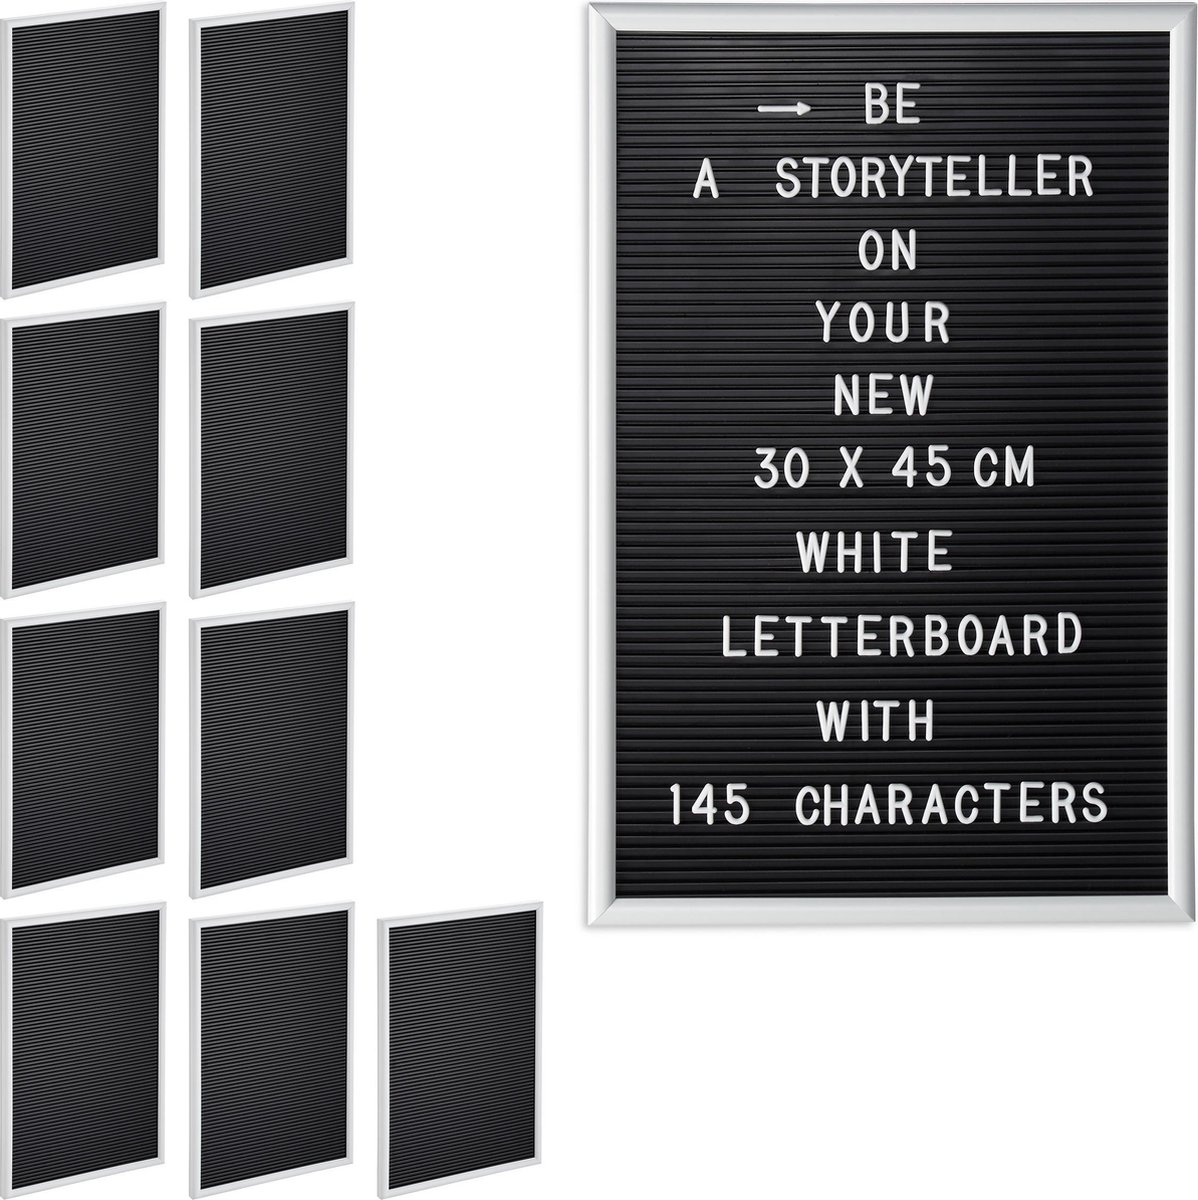 Relaxdays 10x letterbord 30x45 decoratie letter board bord voor letters wit